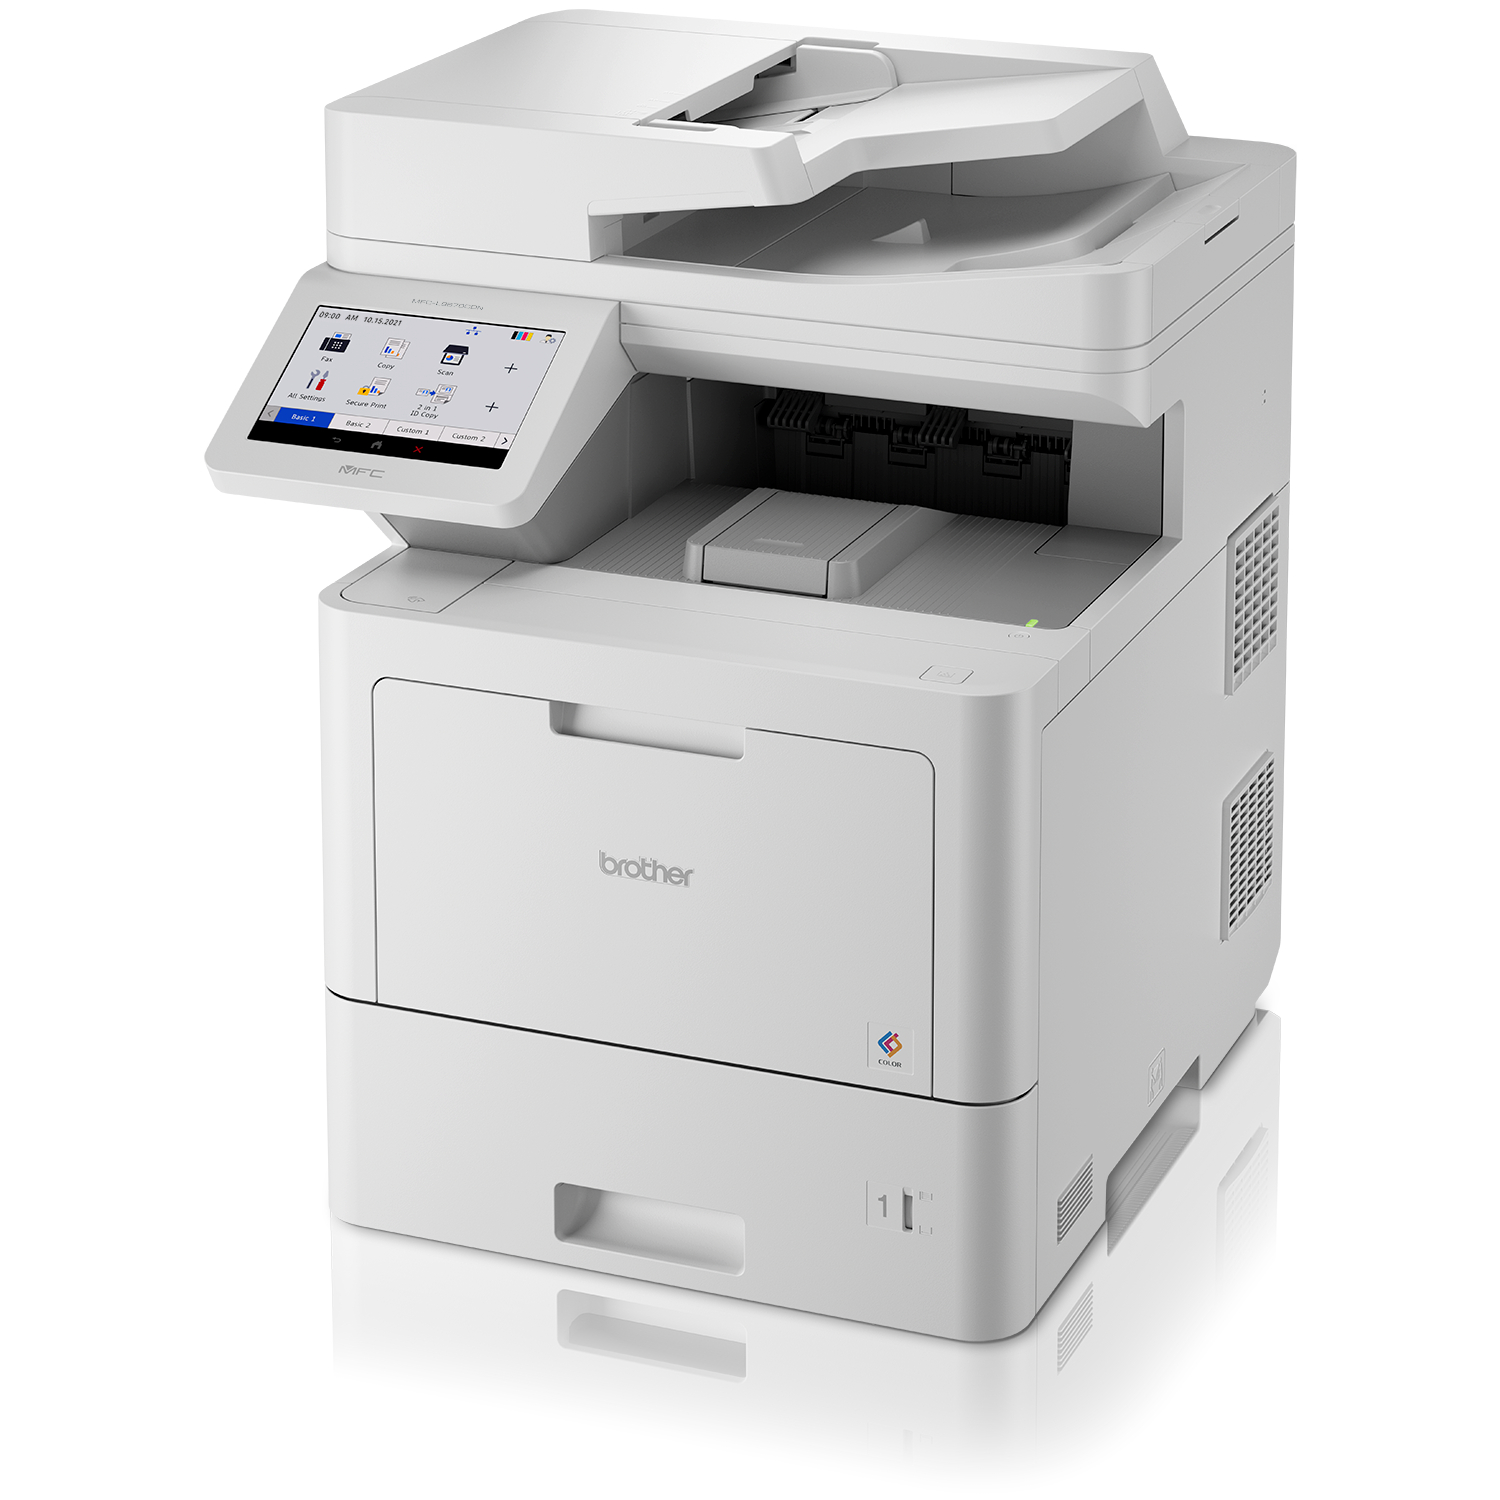 Brother Introduces the Fastest, Boldest, and Most Secure Enterprise Color Laser Printers Built for How Work Now Works